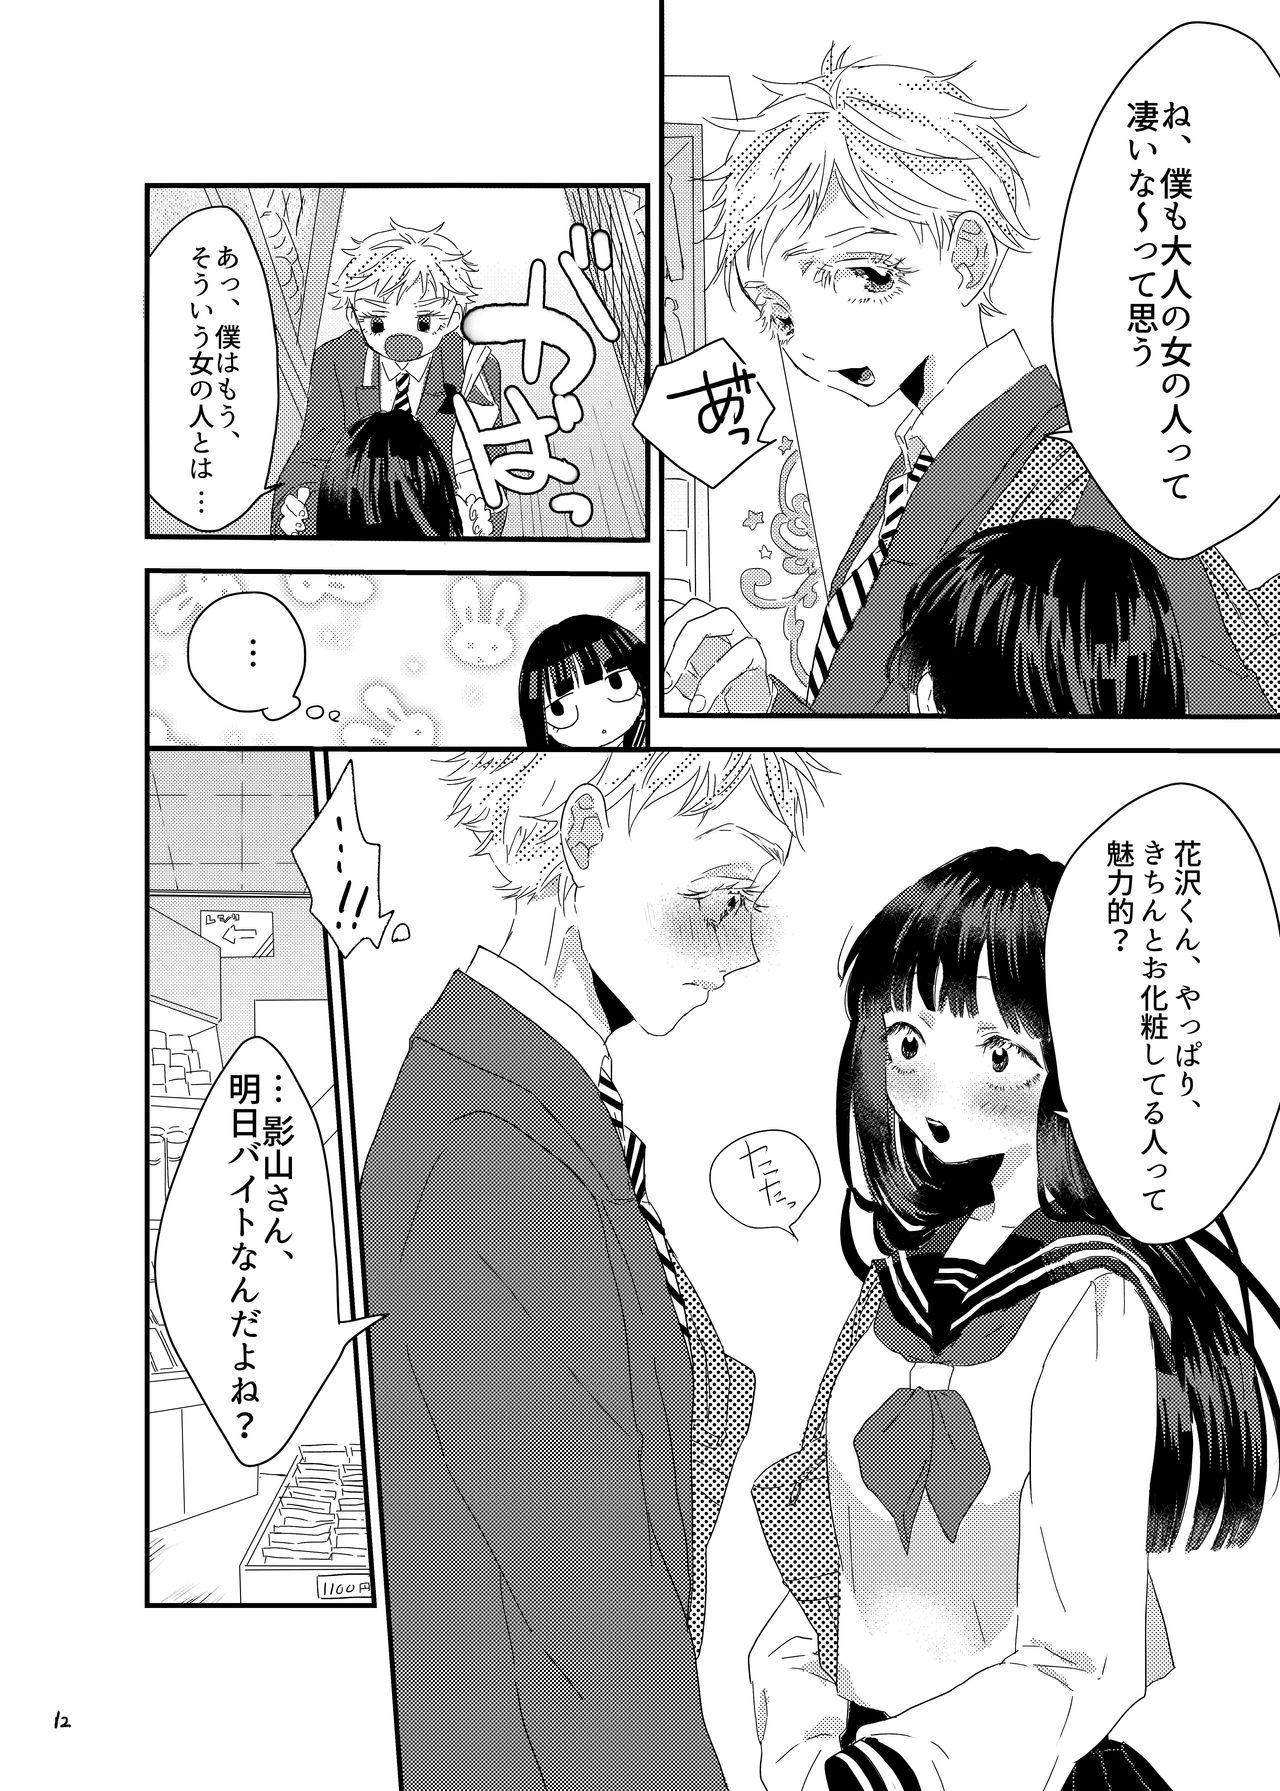 For 砂糖菓子姫 - Mob psycho 100 Lady - Page 11